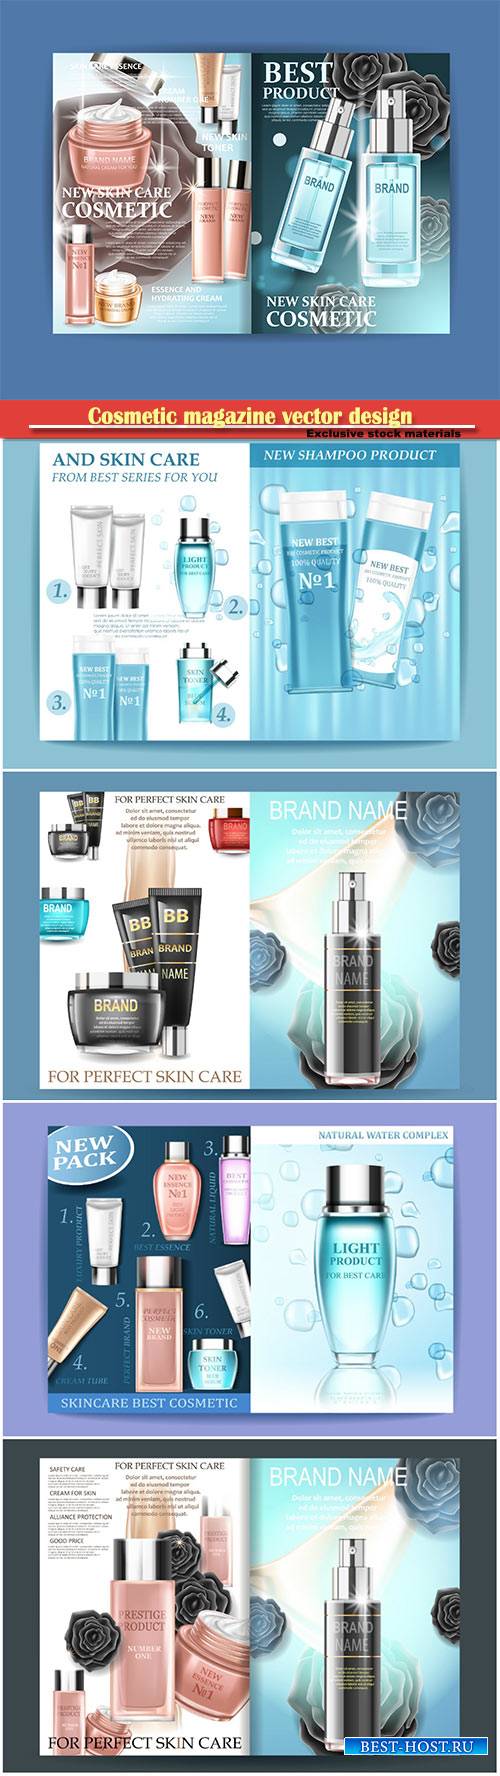 Cosmetic magazine vector design, best care, can be used for different proje ...